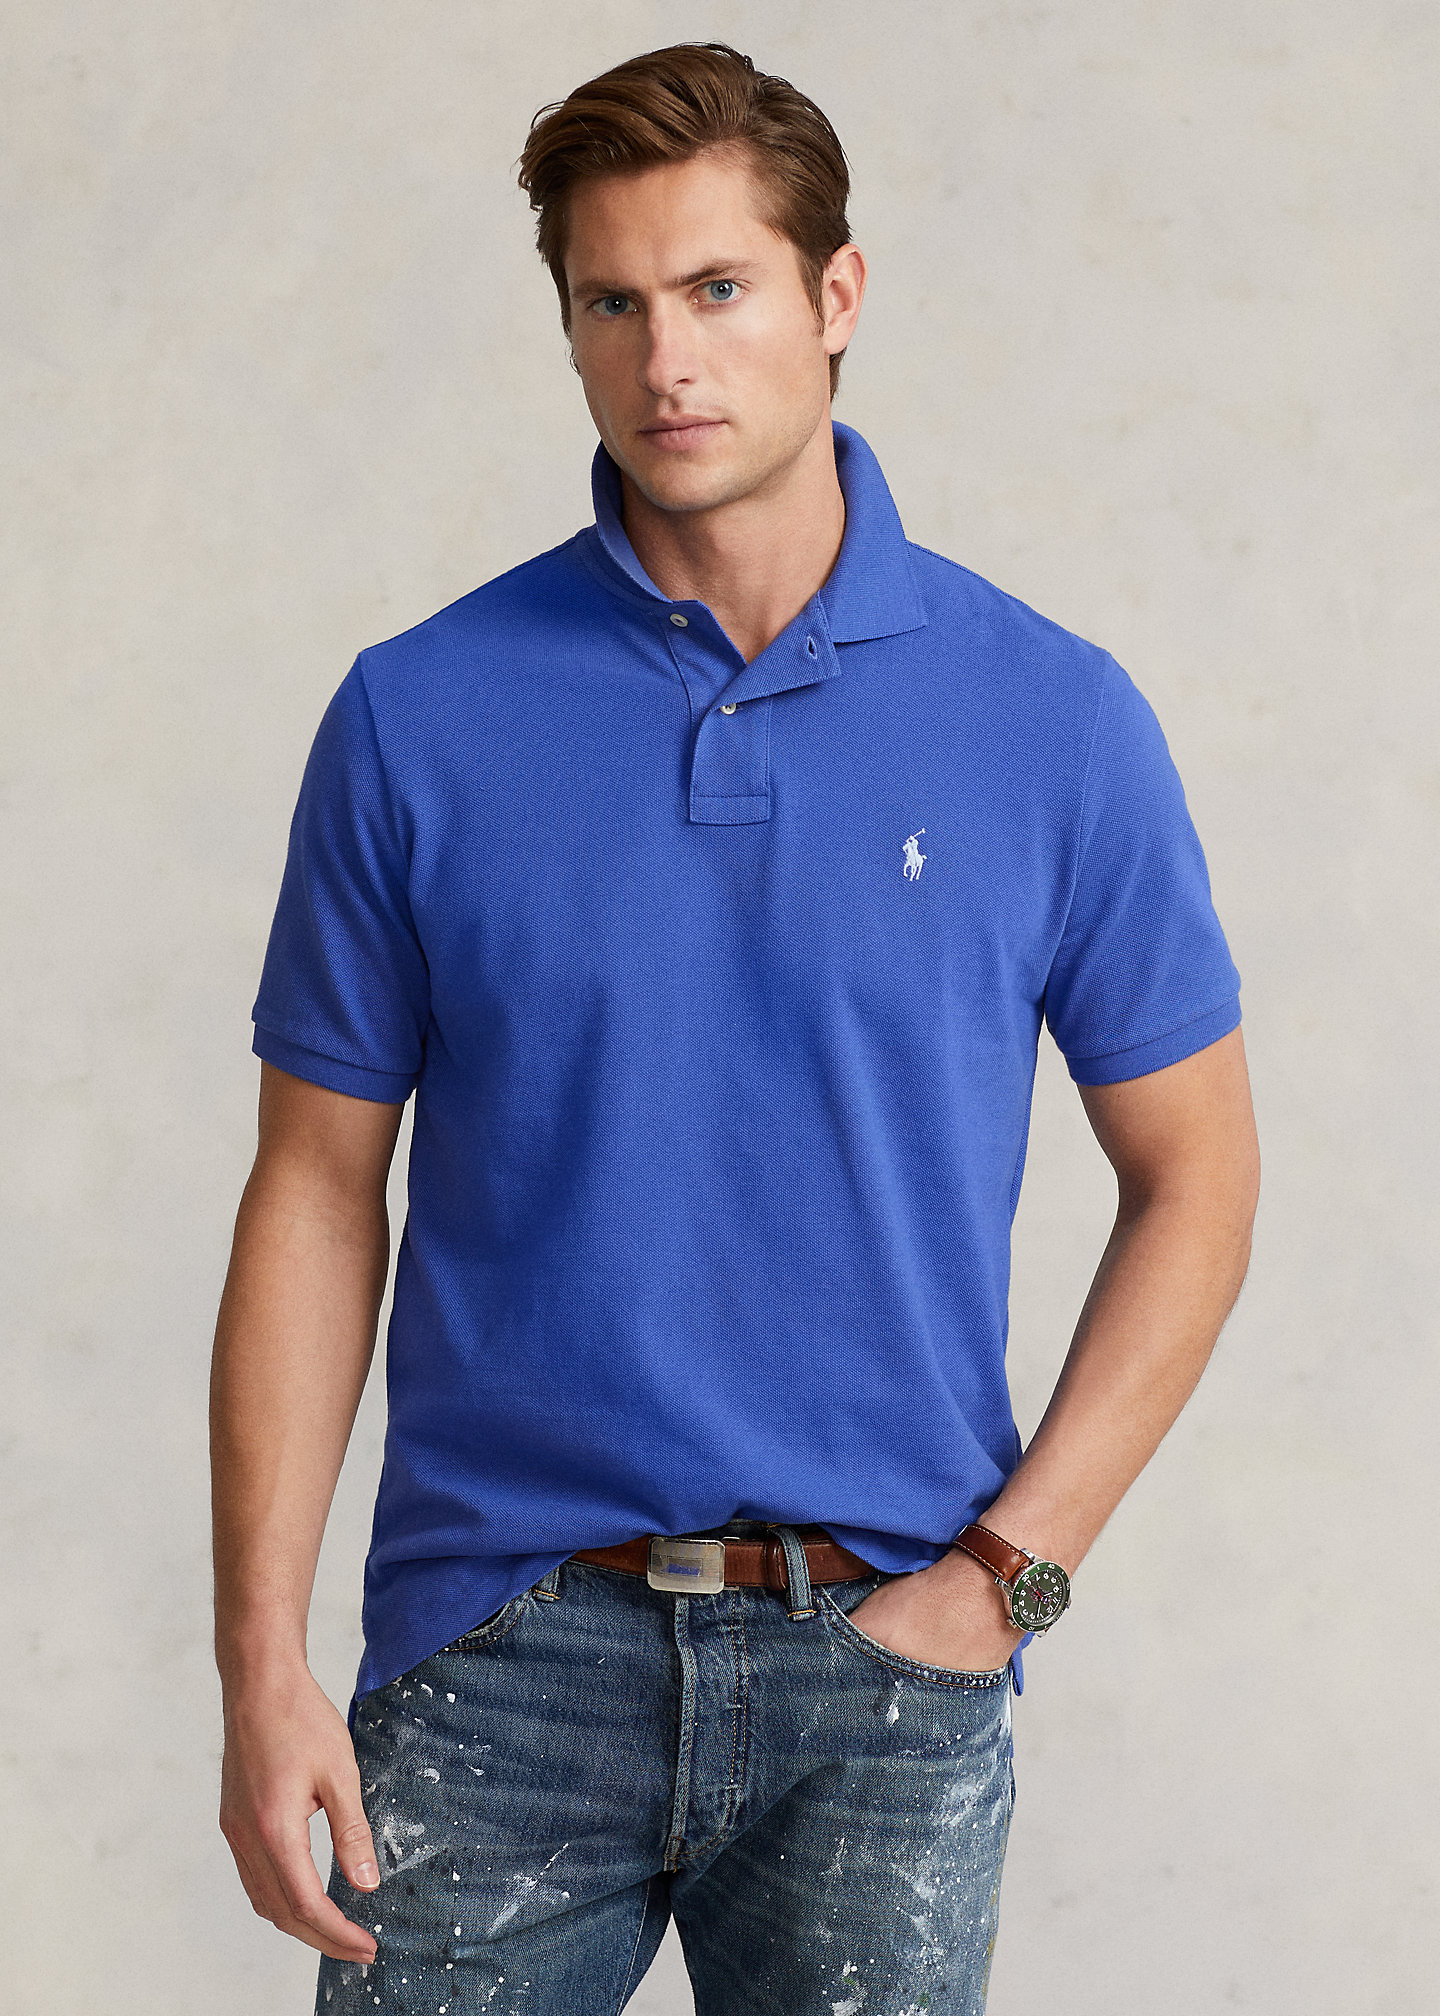 Polo Ralph Lauren The Iconic Mesh Polo Shirt - All Fits 1